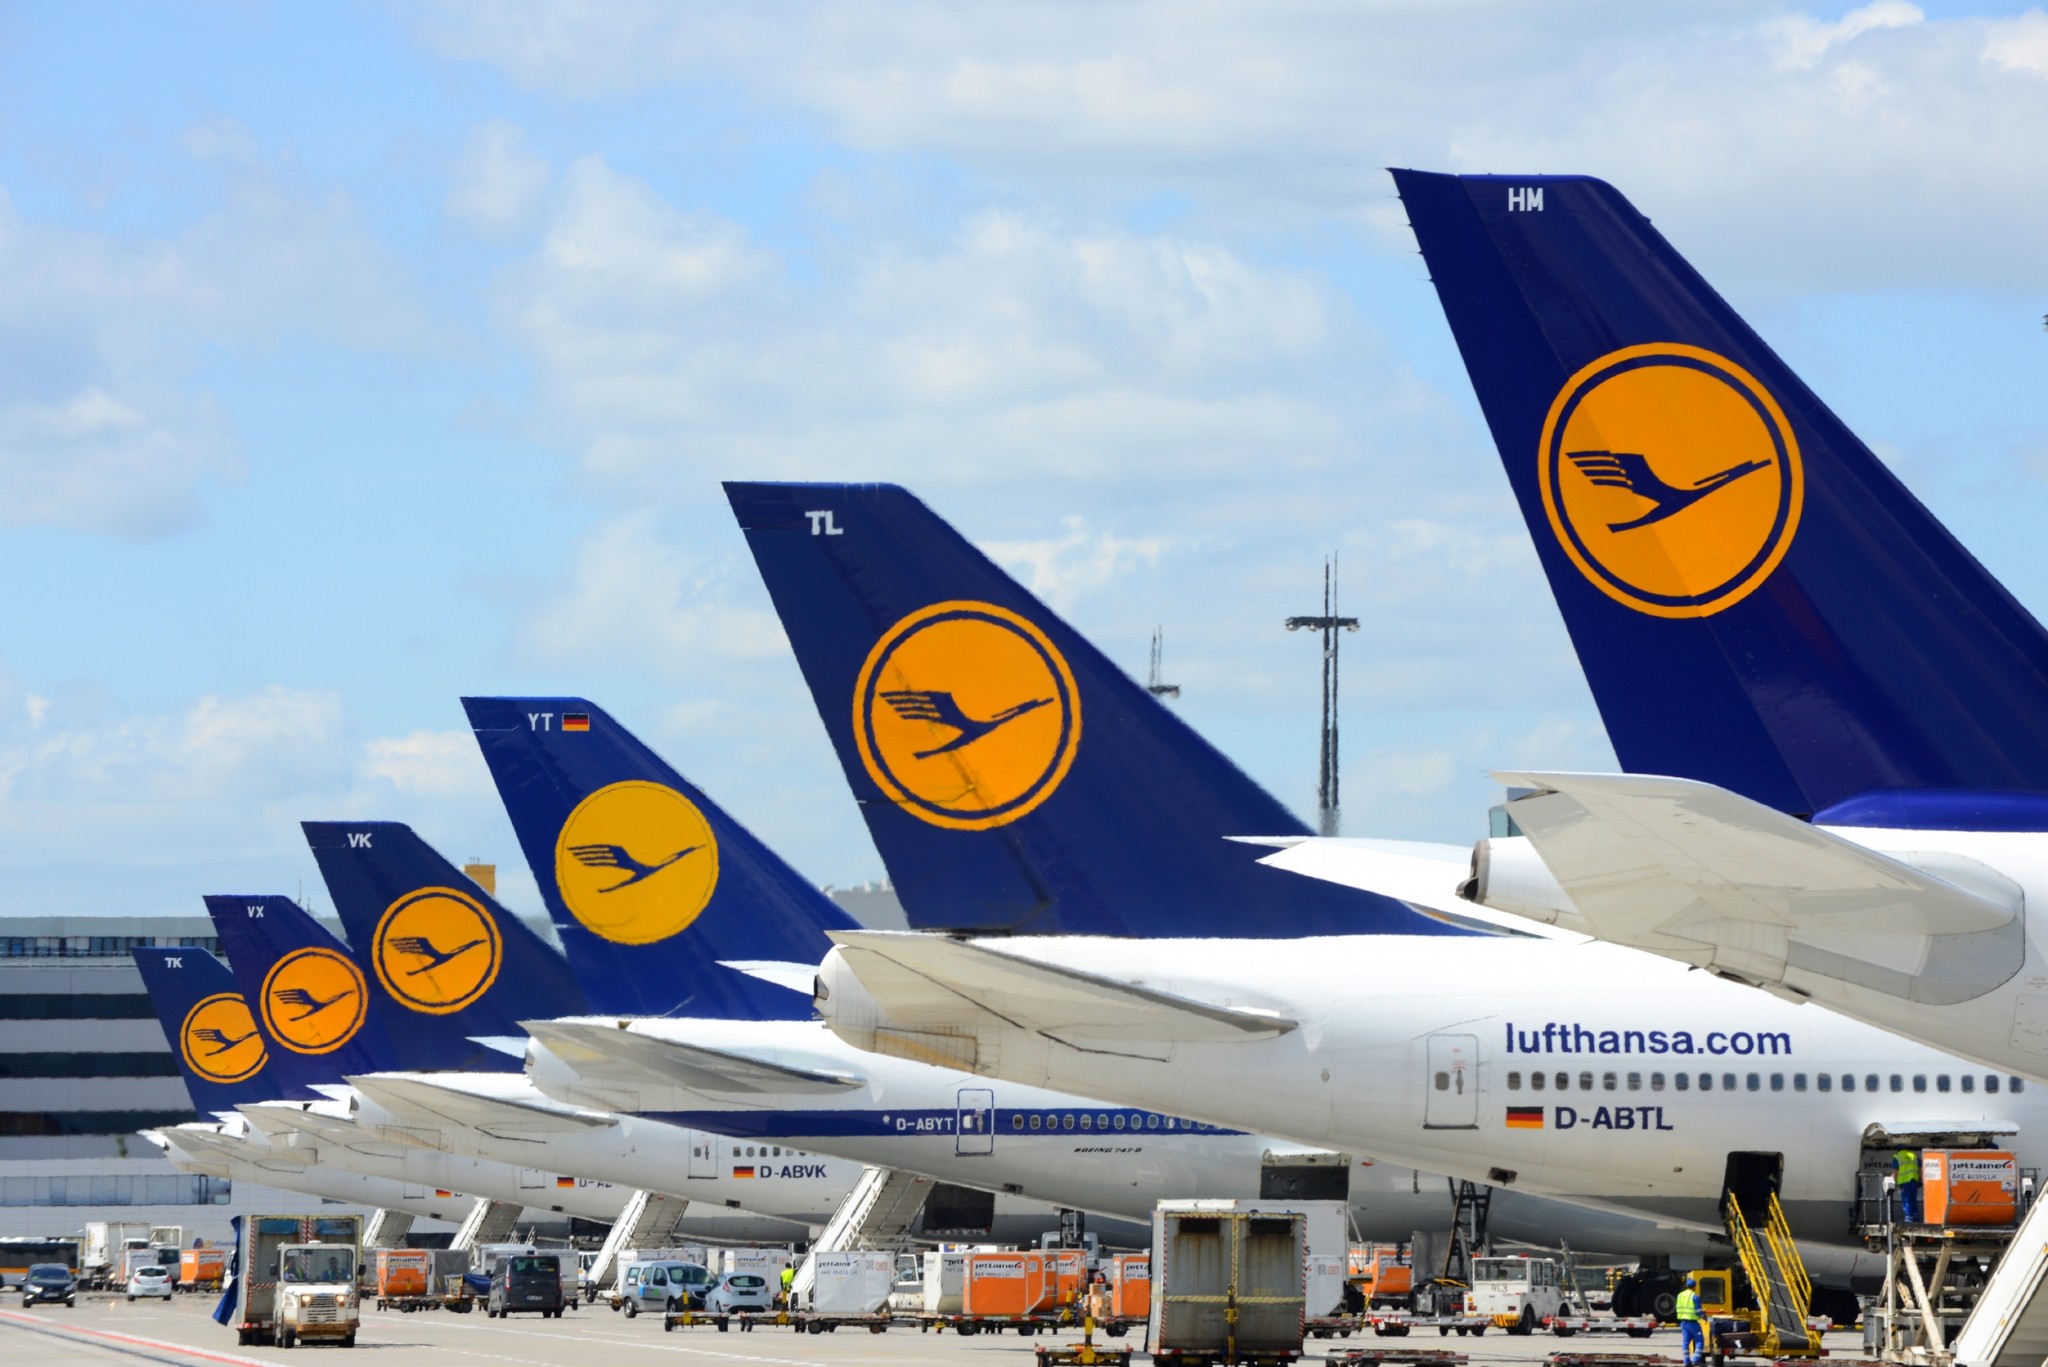 Lufthansa to run out of cash without government aid